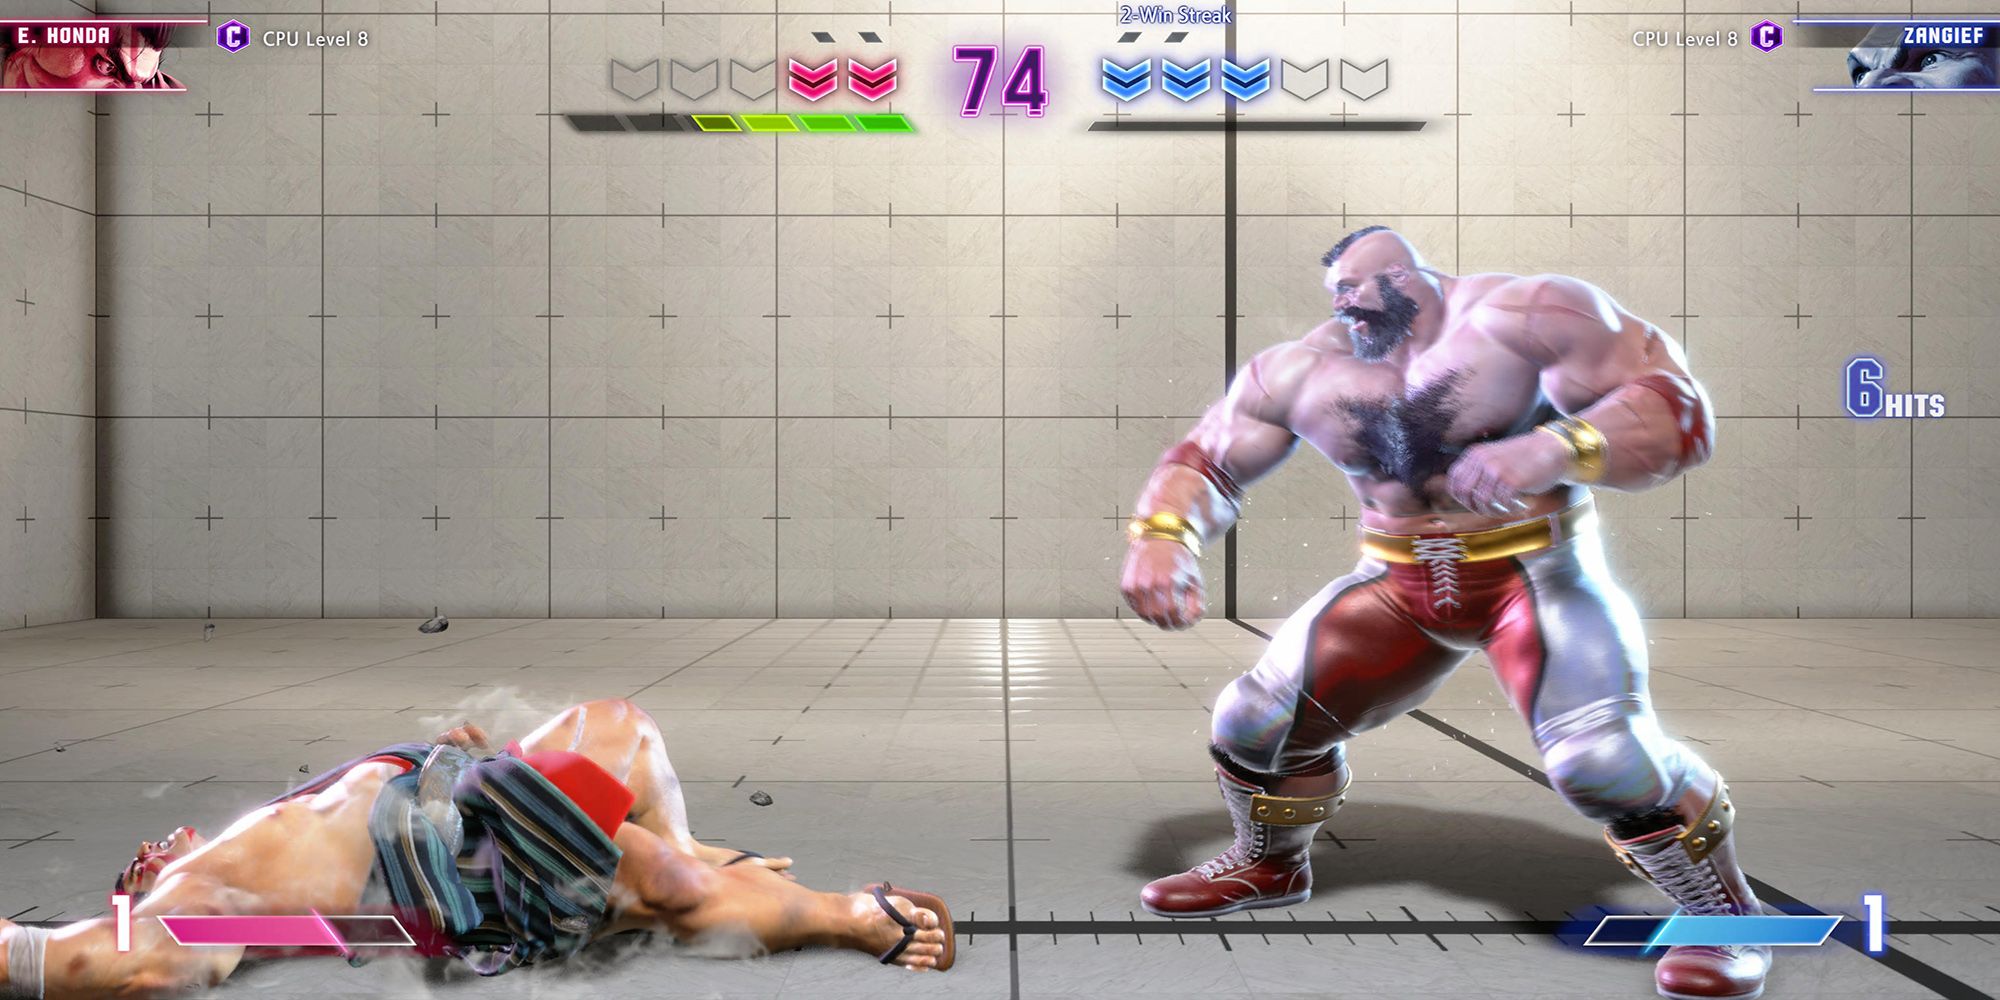 Zangief slams E. Honda into the ground during a Down And Out match at the Training Stage in Street Fighter 6.